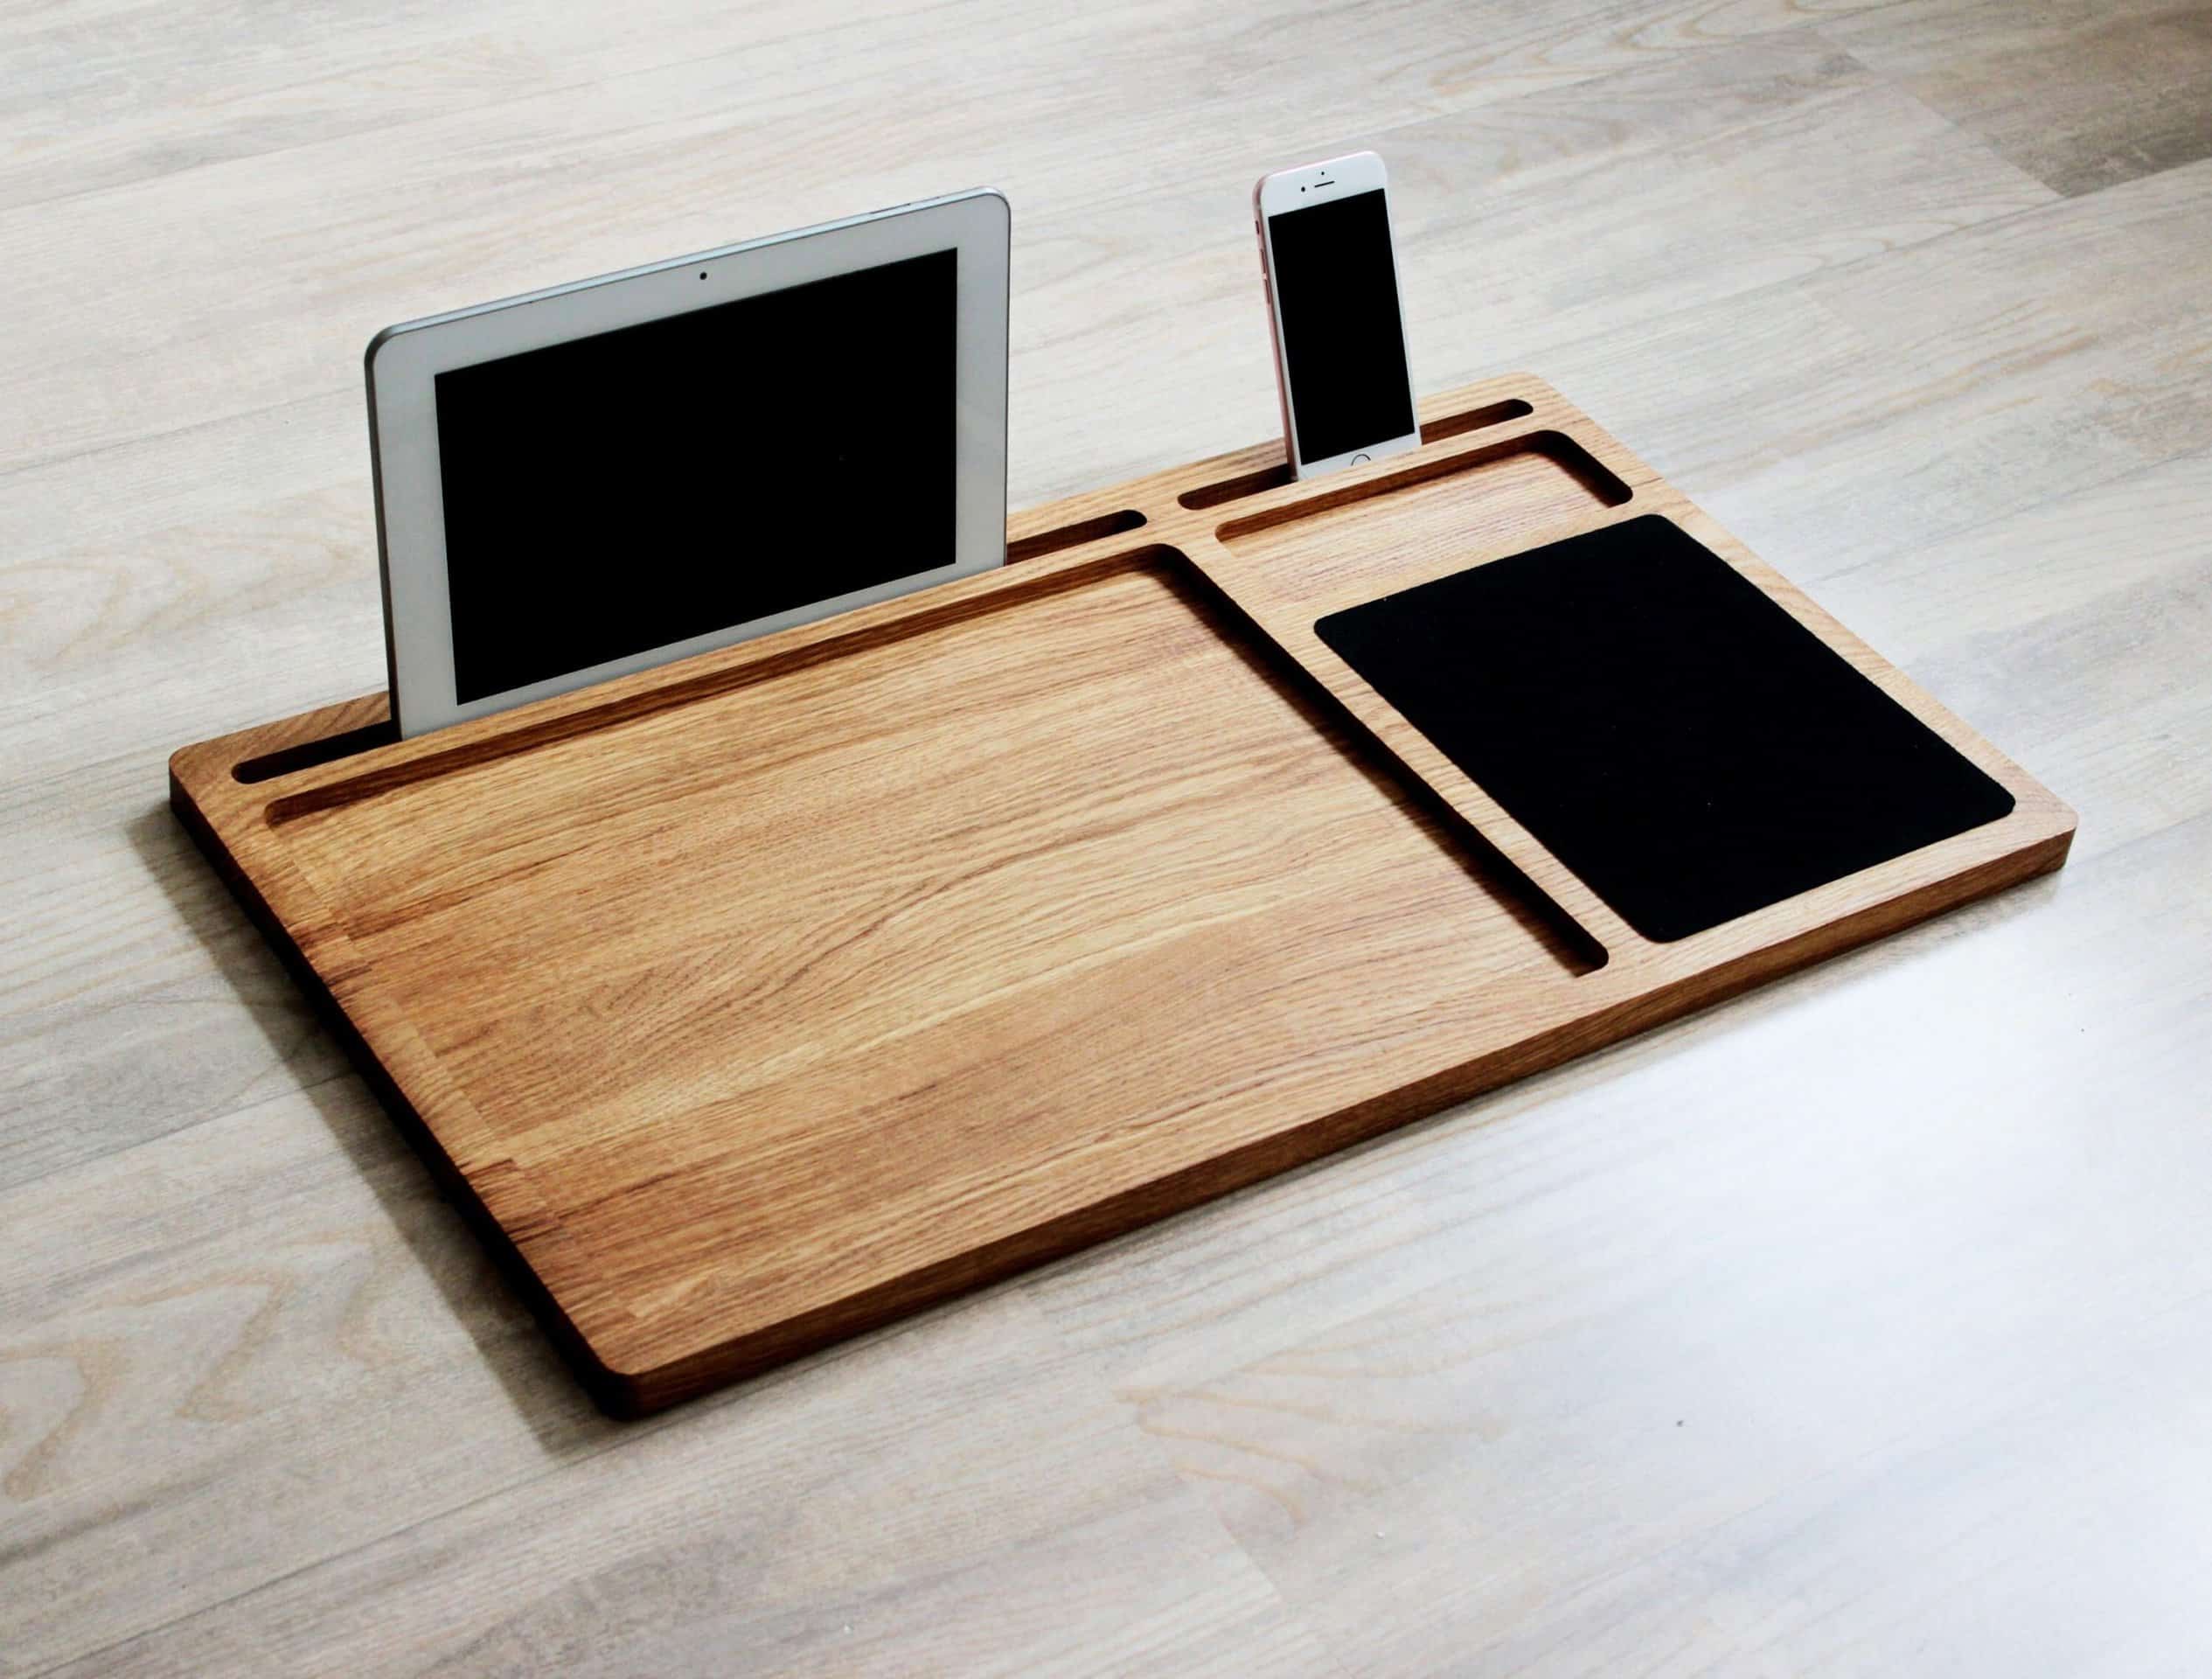 Lap Desk With Phone Holder